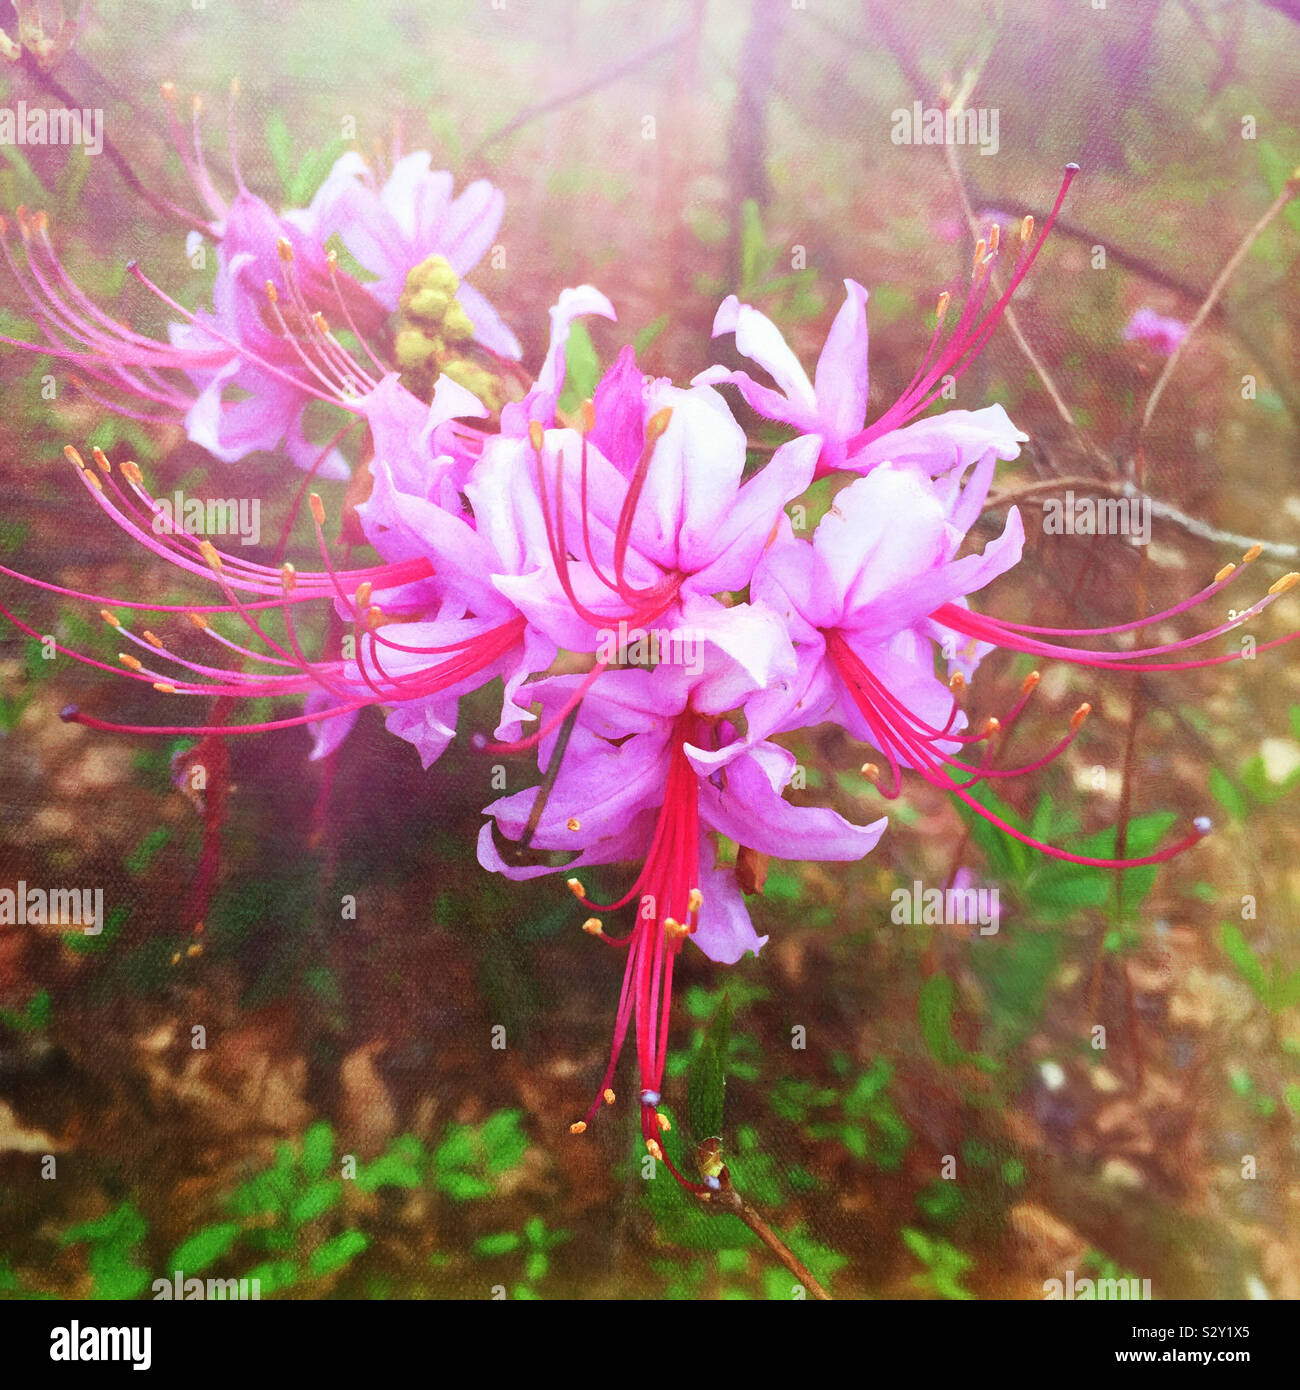 Pink colored native azalea flower in bloom growing in a shaded woodland garden in the southern USA states. The native azalea is a rhododendron and is a deciduous plant. Stock Photo